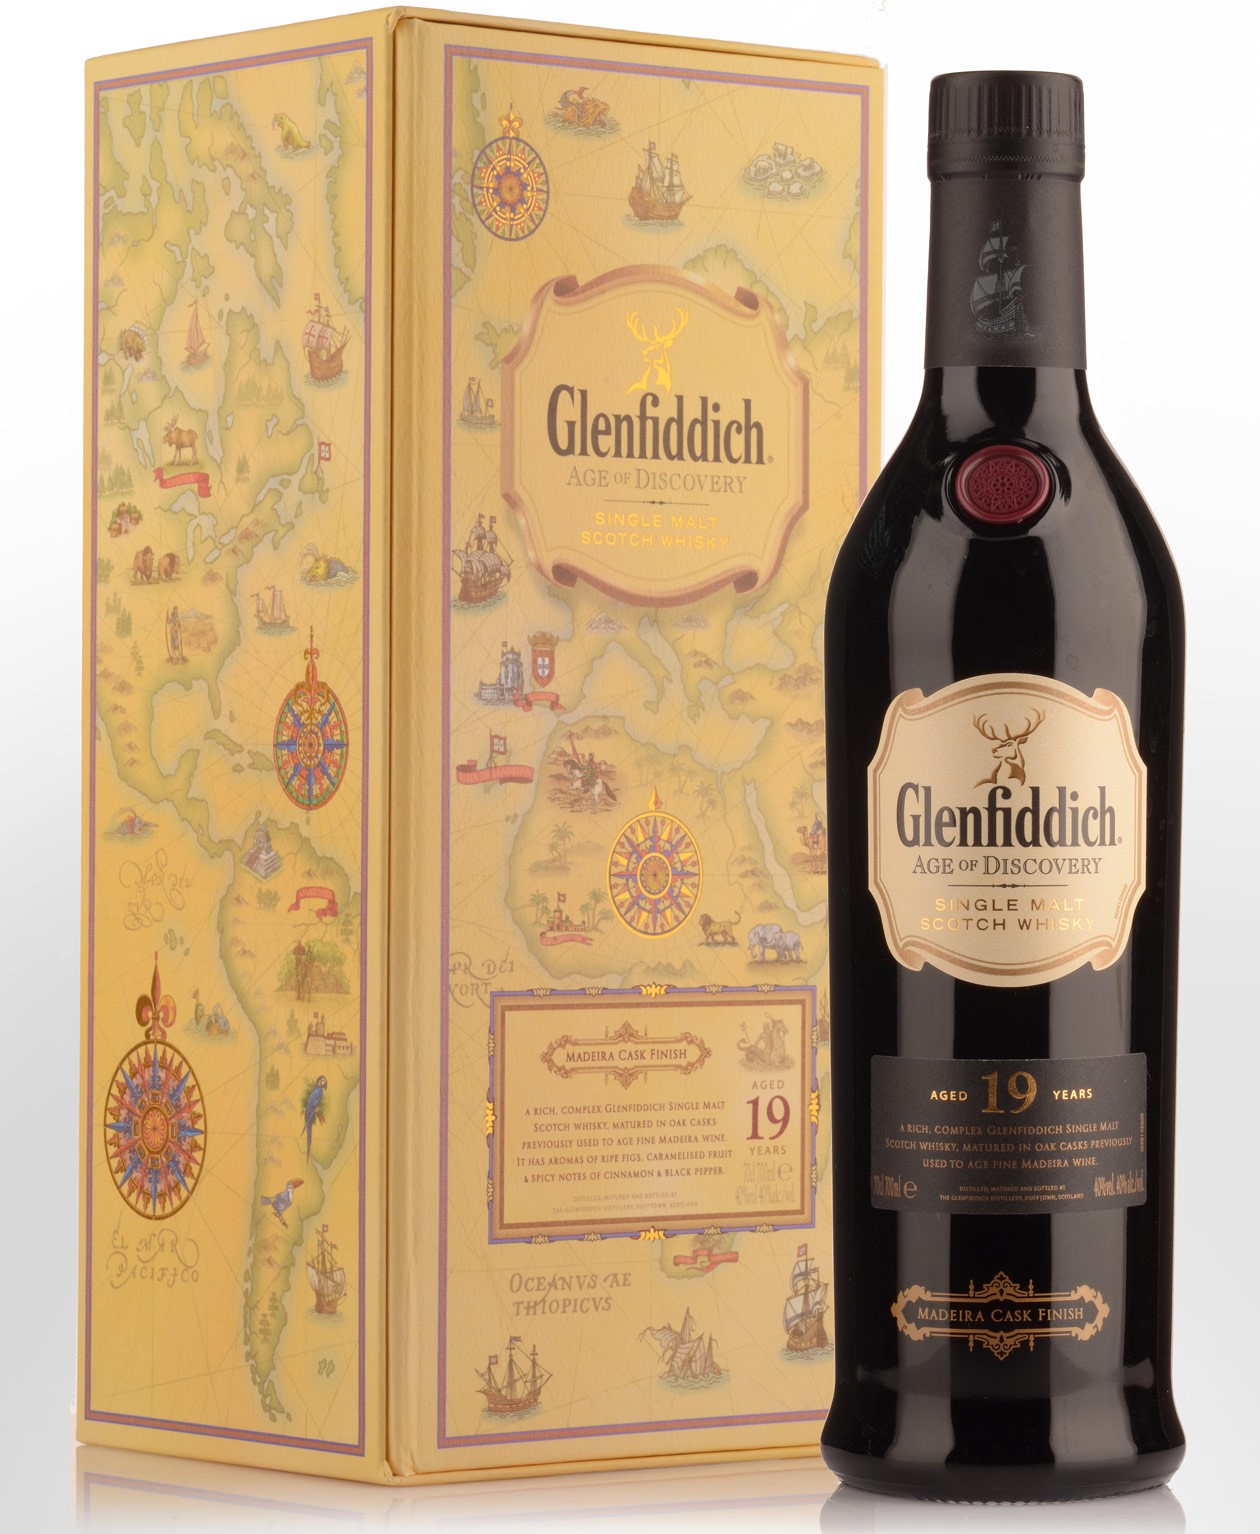 Gflenfiddich age of Discovery Madeira finish whisky